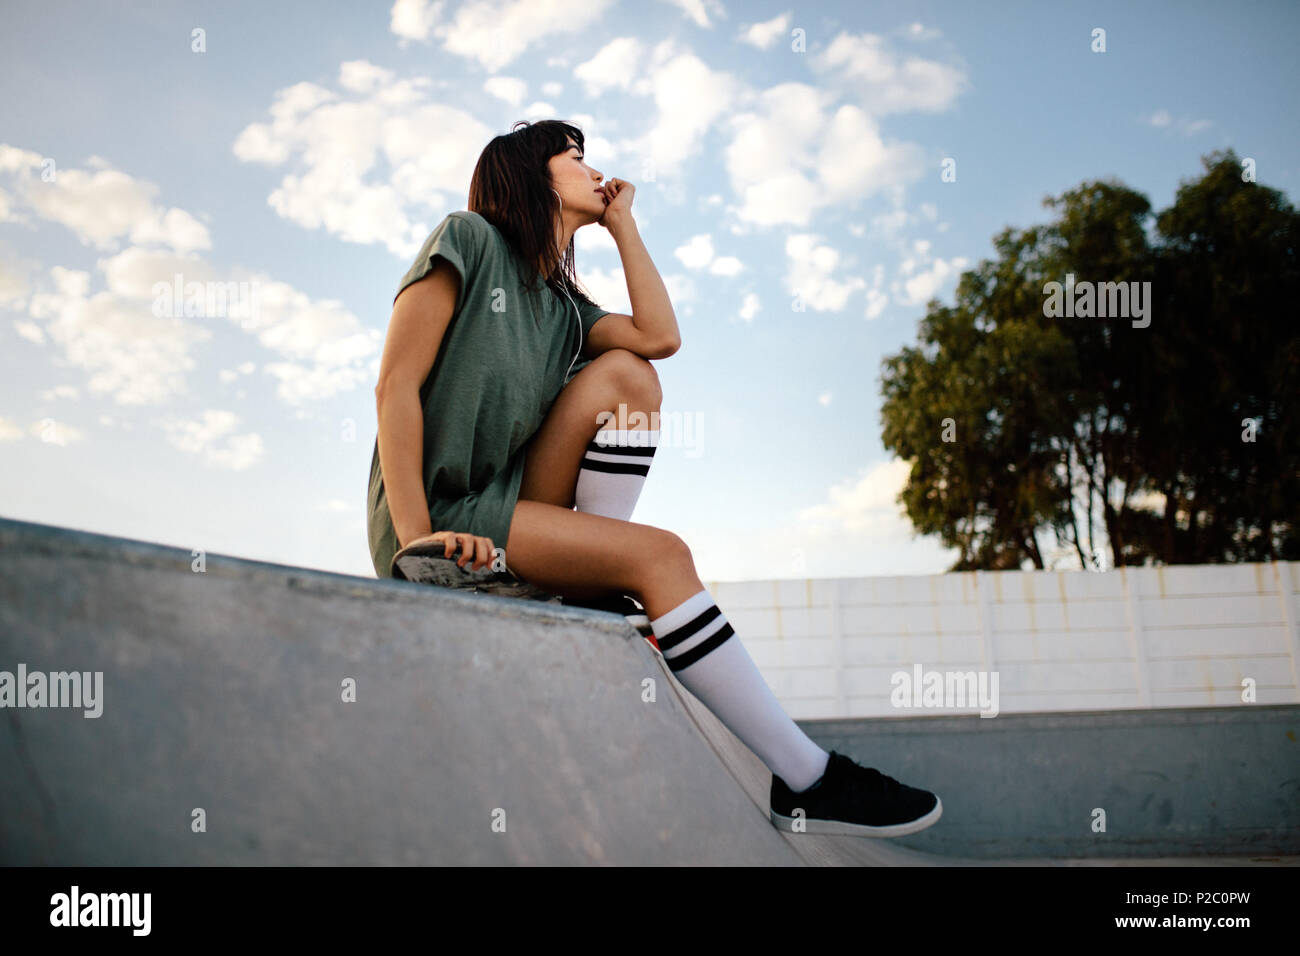 Woman sitting on skating ramp looking away and thinking at the skate park. Young female skateboarded relaxing at skate park. Stock Photo